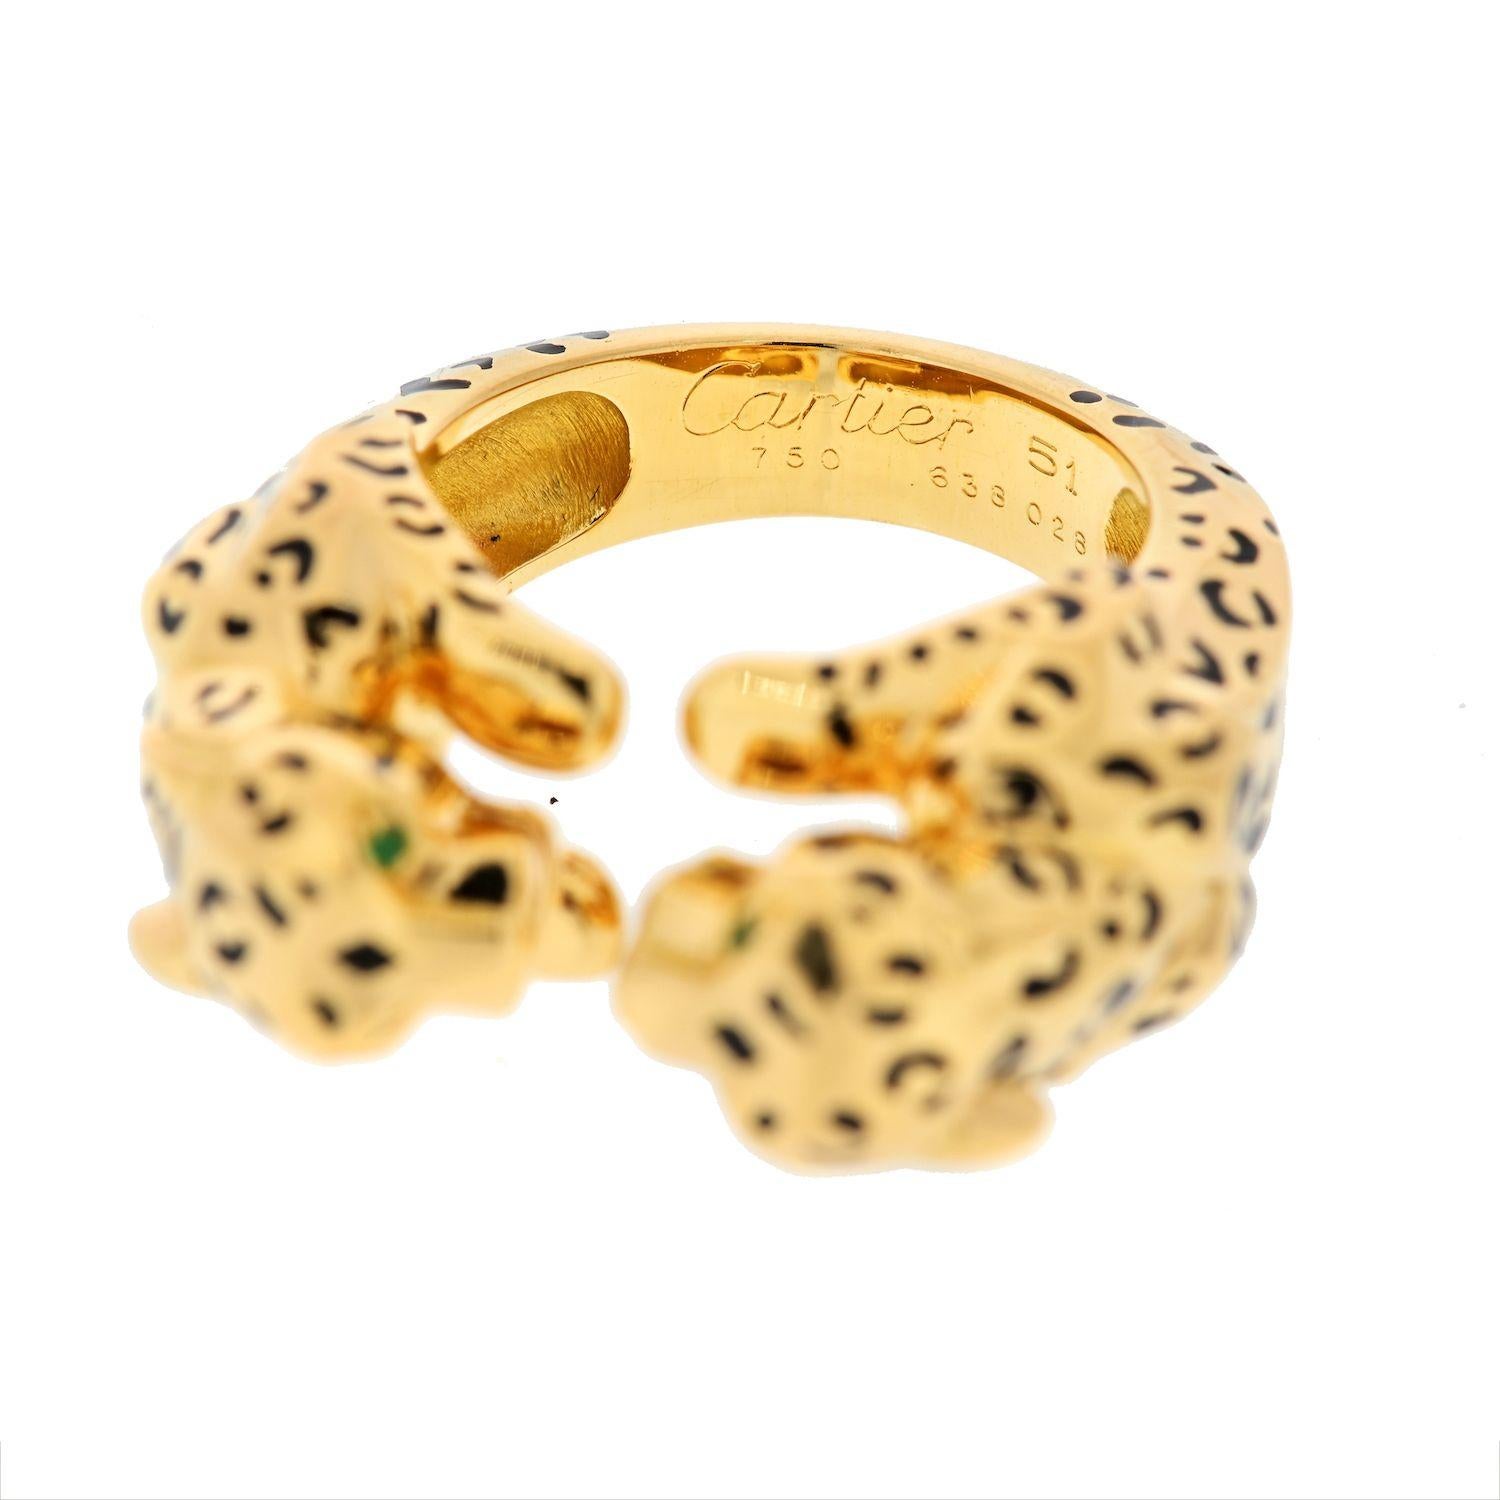 The beauty of wild cats is captured in this striking pre-owned Cartier design. Crafted in 18kt yellow gold, this ring is detailed with black enamel and boasts a double panther motif. Add a ferocious, feline flair to your look.

The ring is composed